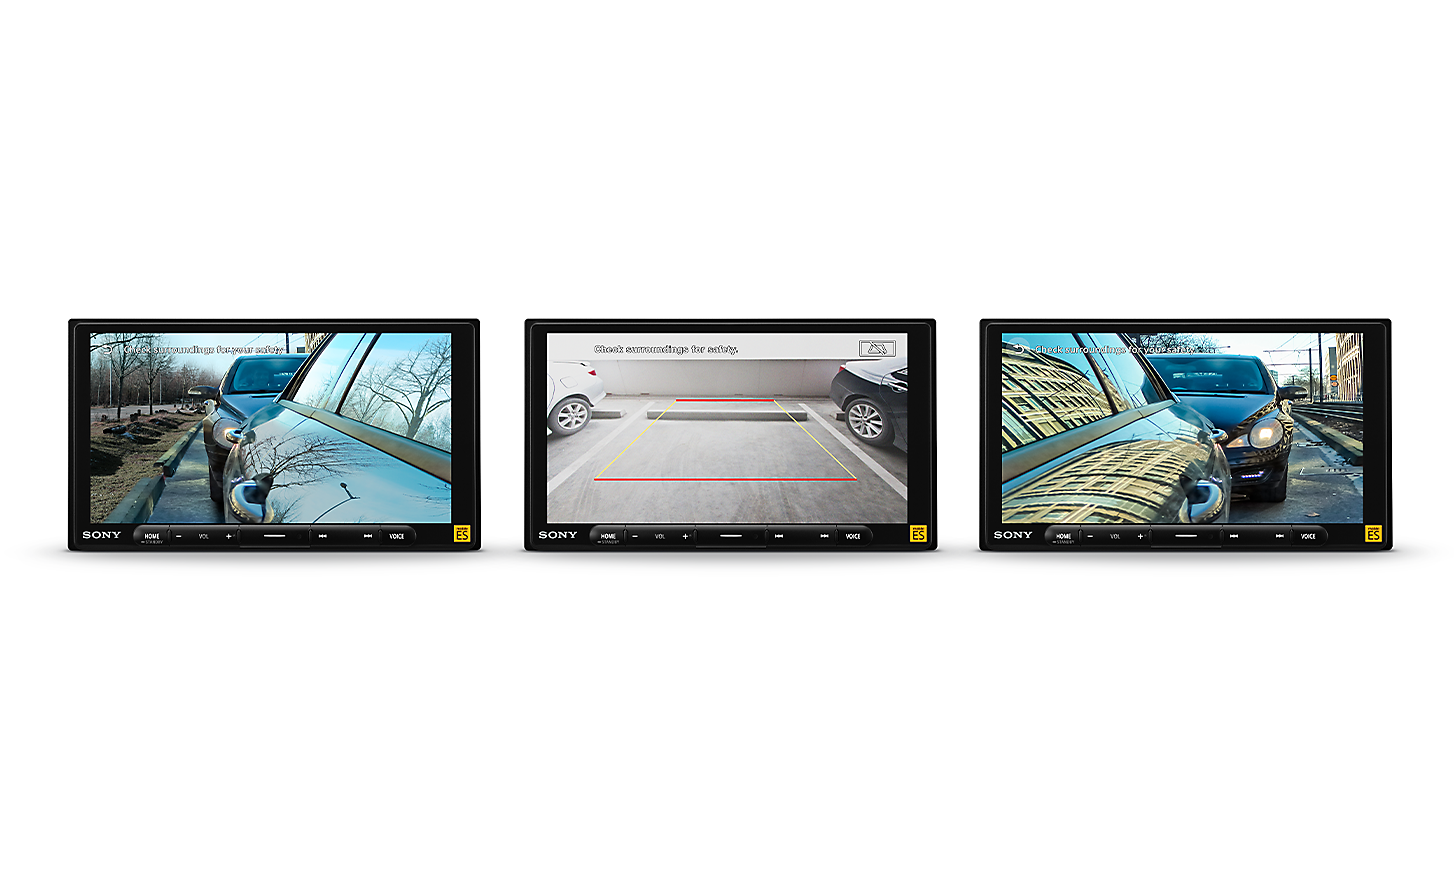 Image of 3 XAV-9000ES units displaying the parking assist camera views from the left, right and reverse cameras.